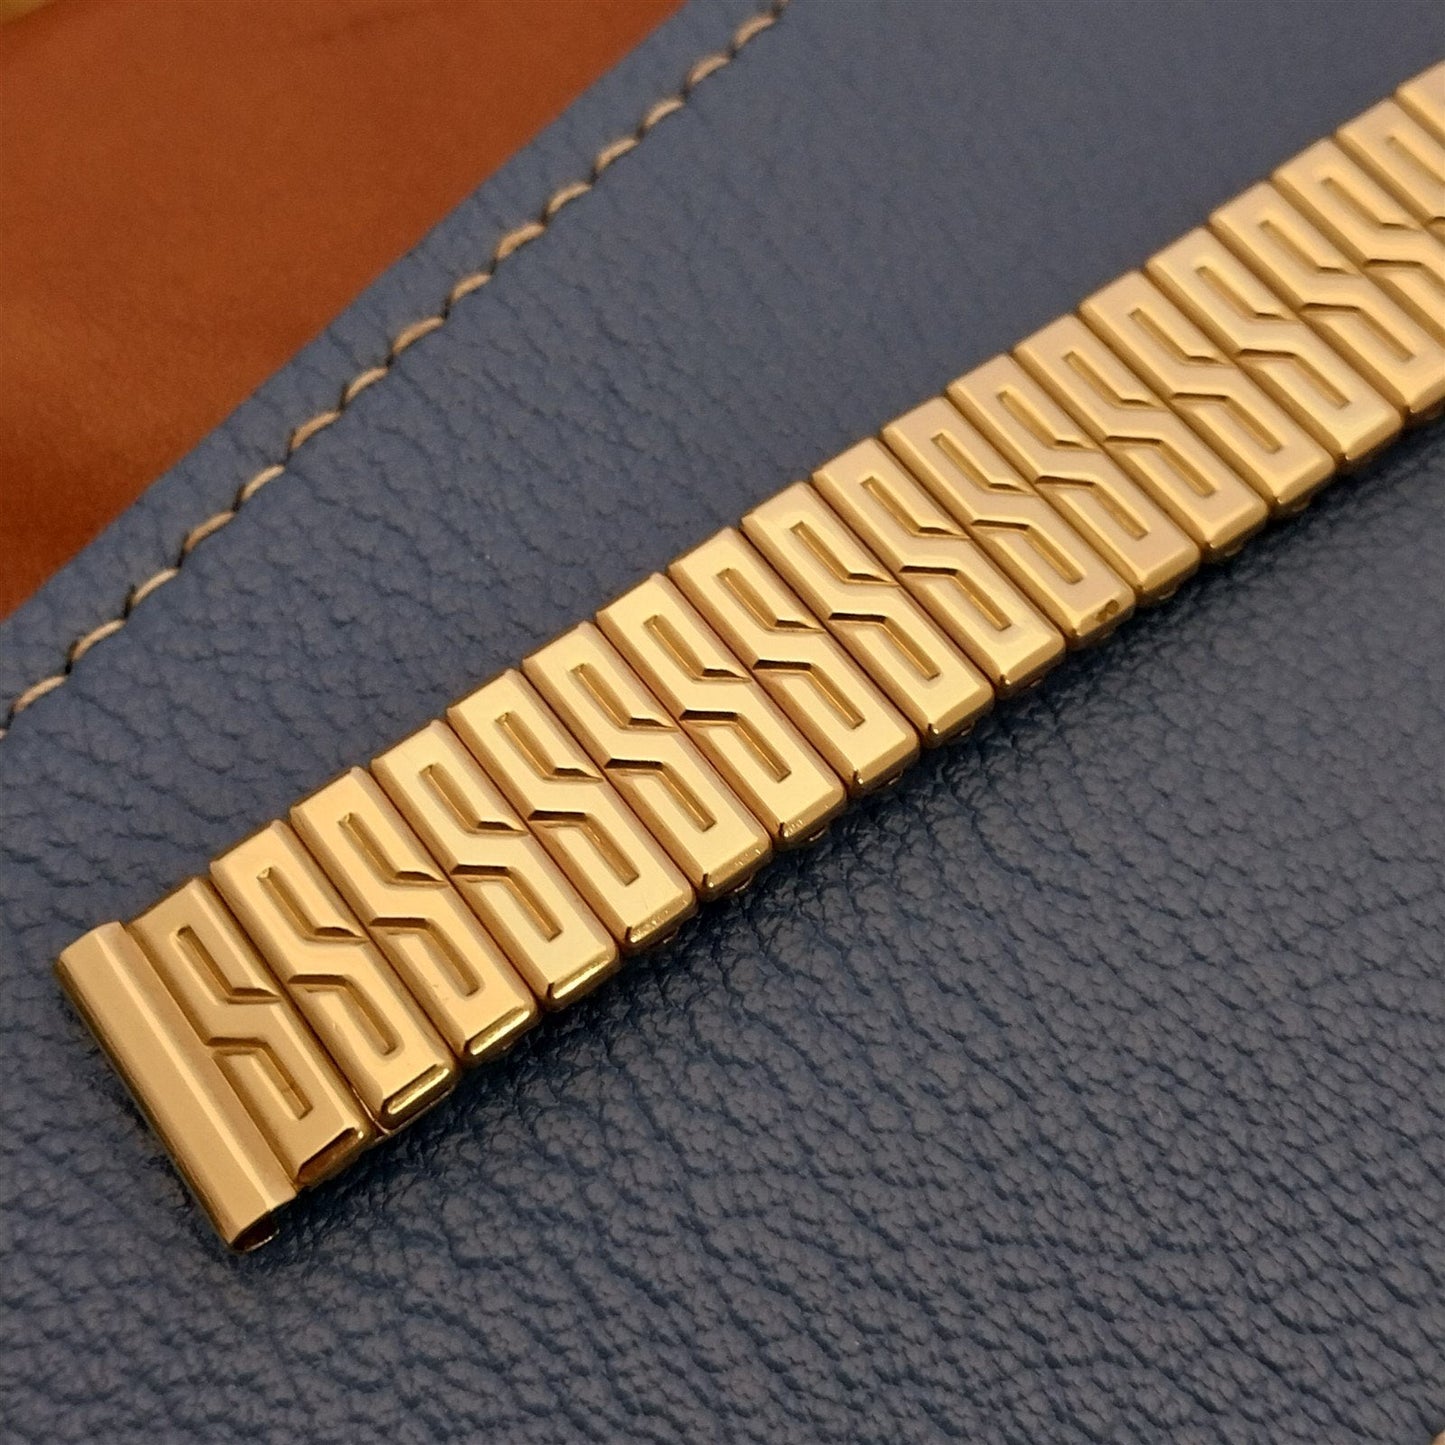 Vintage 5/8" Kreisler USA Gold-Filled Stretch Expansion Classic Watch Band